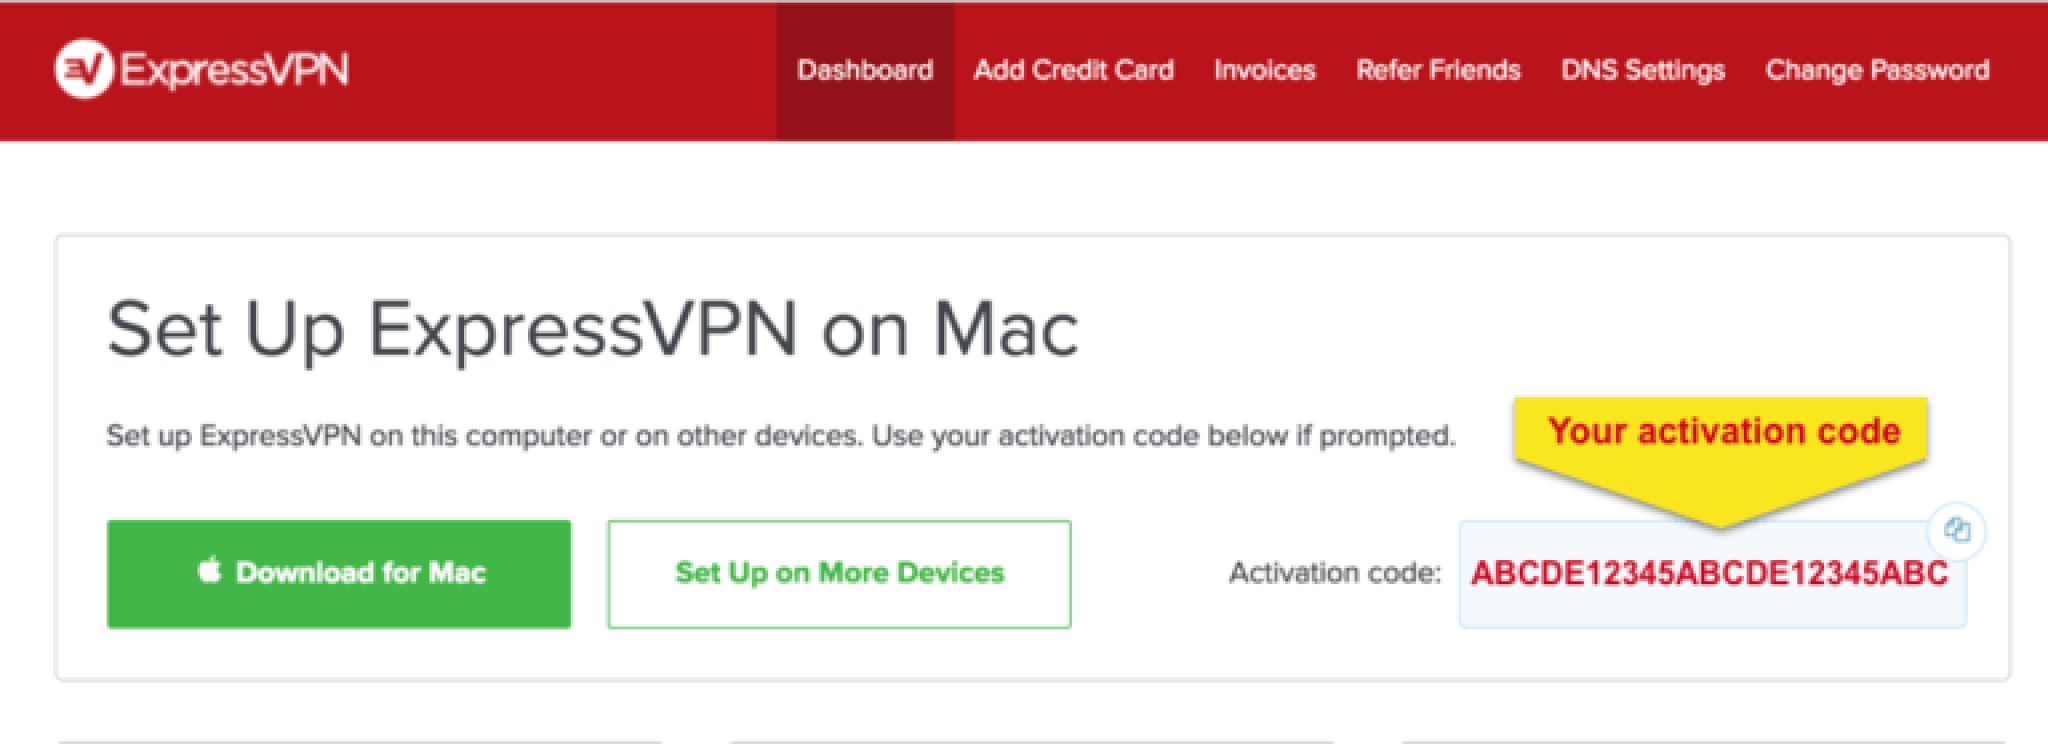 ExpressVPN Activation Code Where Can You Find It?